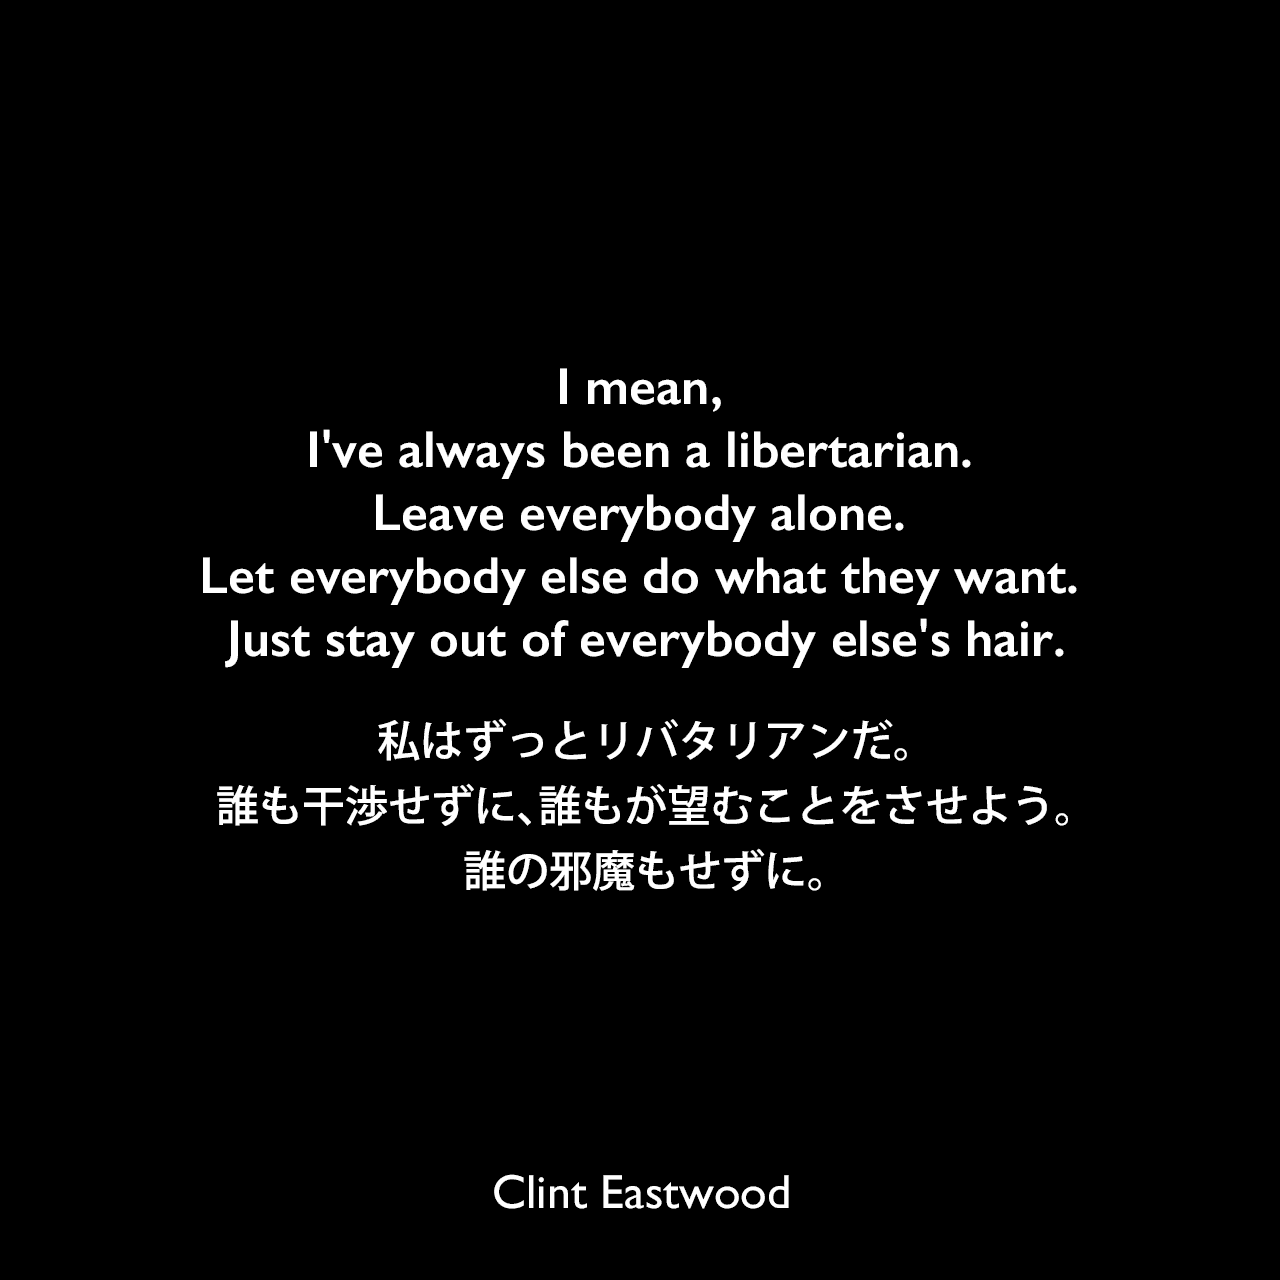 I mean, I've always been a libertarian. Leave everybody alone. Let everybody else do what they want. Just stay out of everybody else's hair.私はずっとリバタリアンだ。誰も干渉せずに、誰もが望むことをさせよう。誰の邪魔もせずに。Clint Eastwood